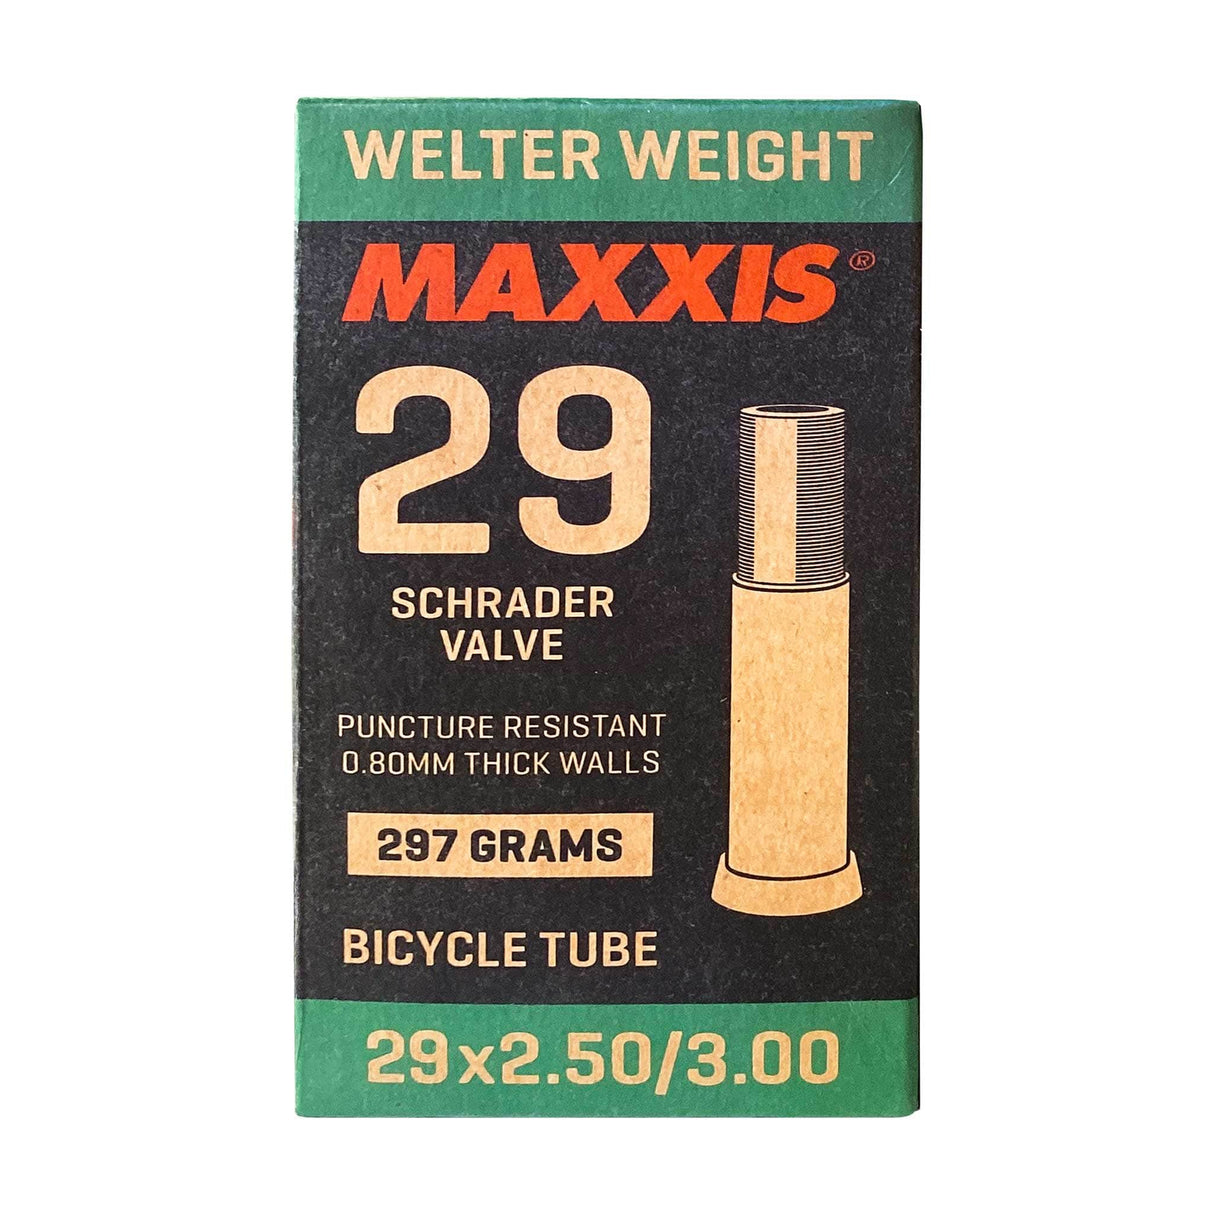 MAXXIS Welter Weight Tube Fat/Plus 29 x 2.5/3.0 Schrader SV 0.8mm